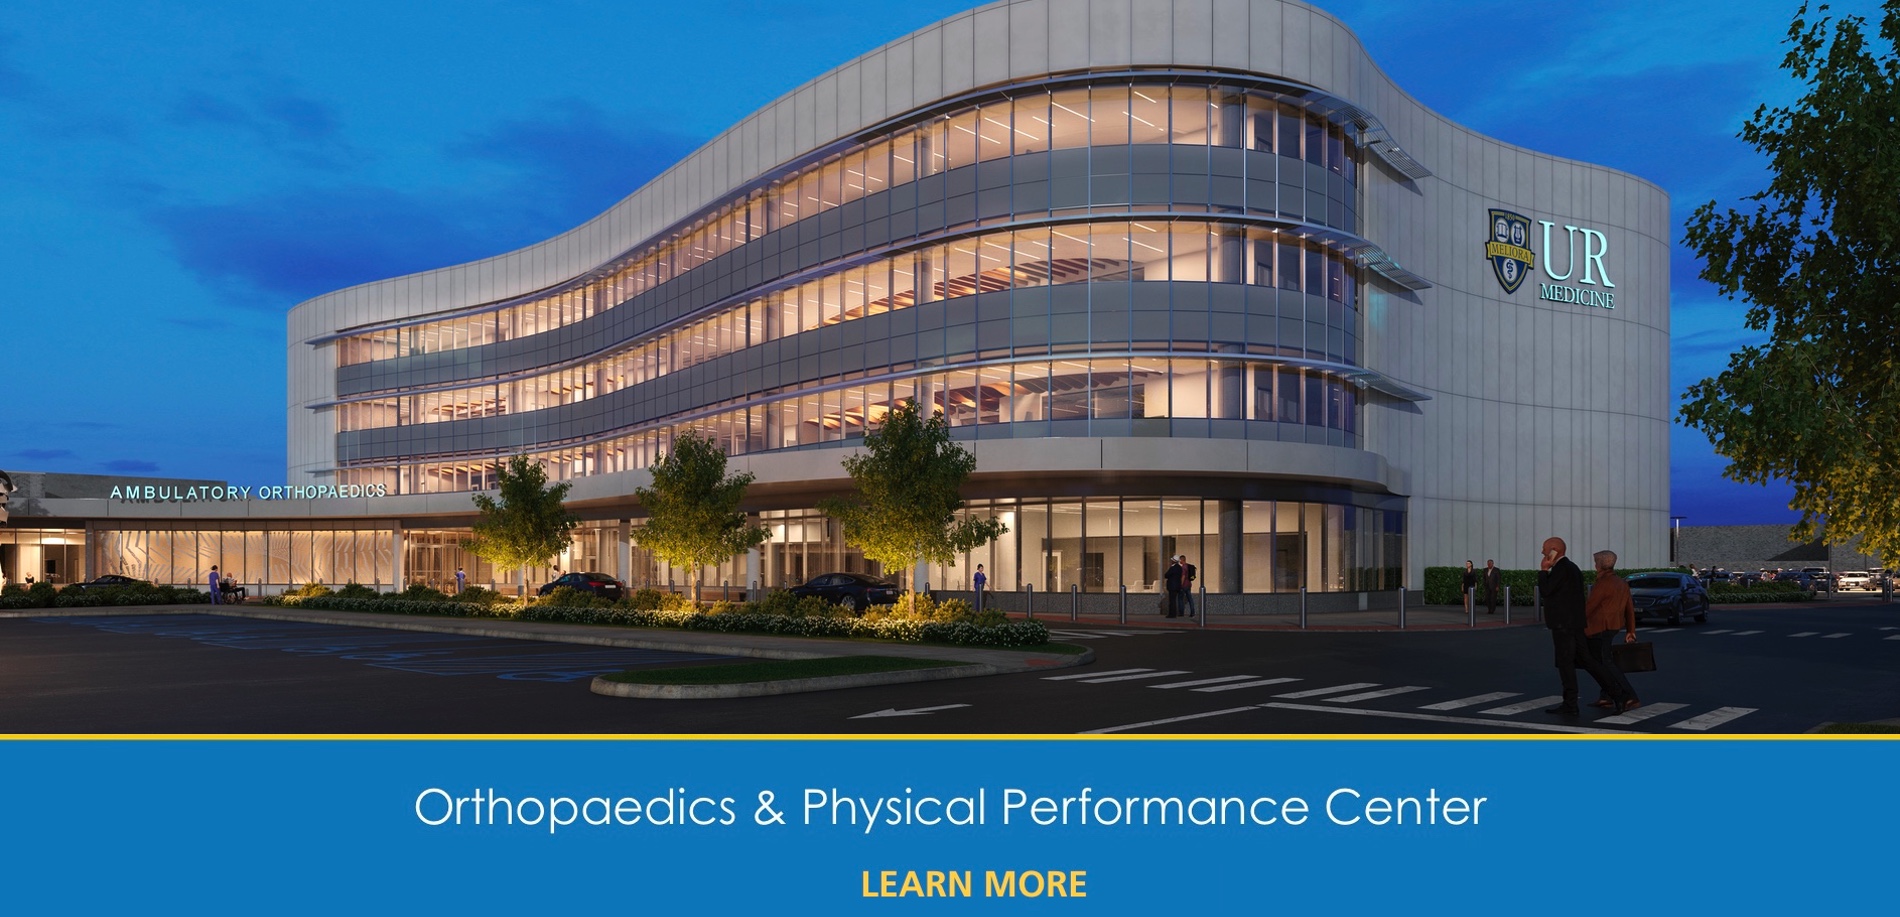 Orthopaedics and Physical Performance Center coming soon